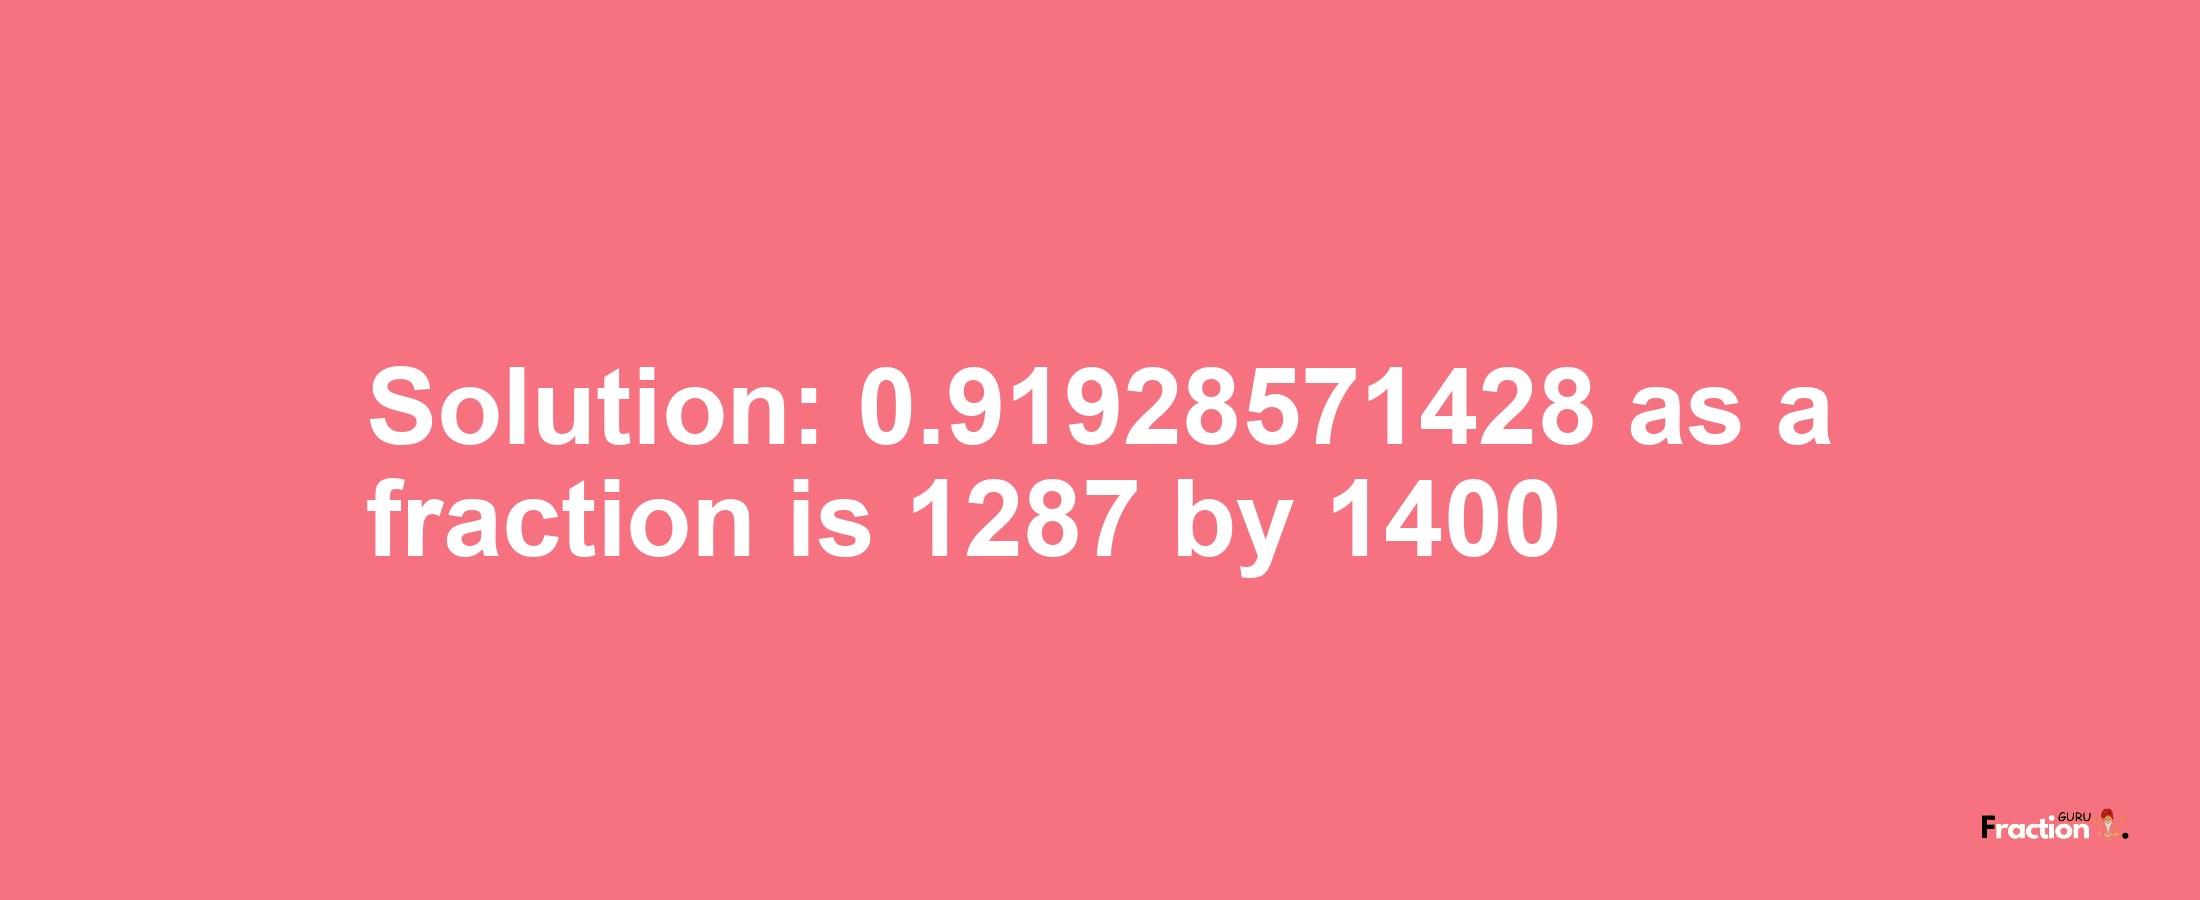 Solution:0.91928571428 as a fraction is 1287/1400